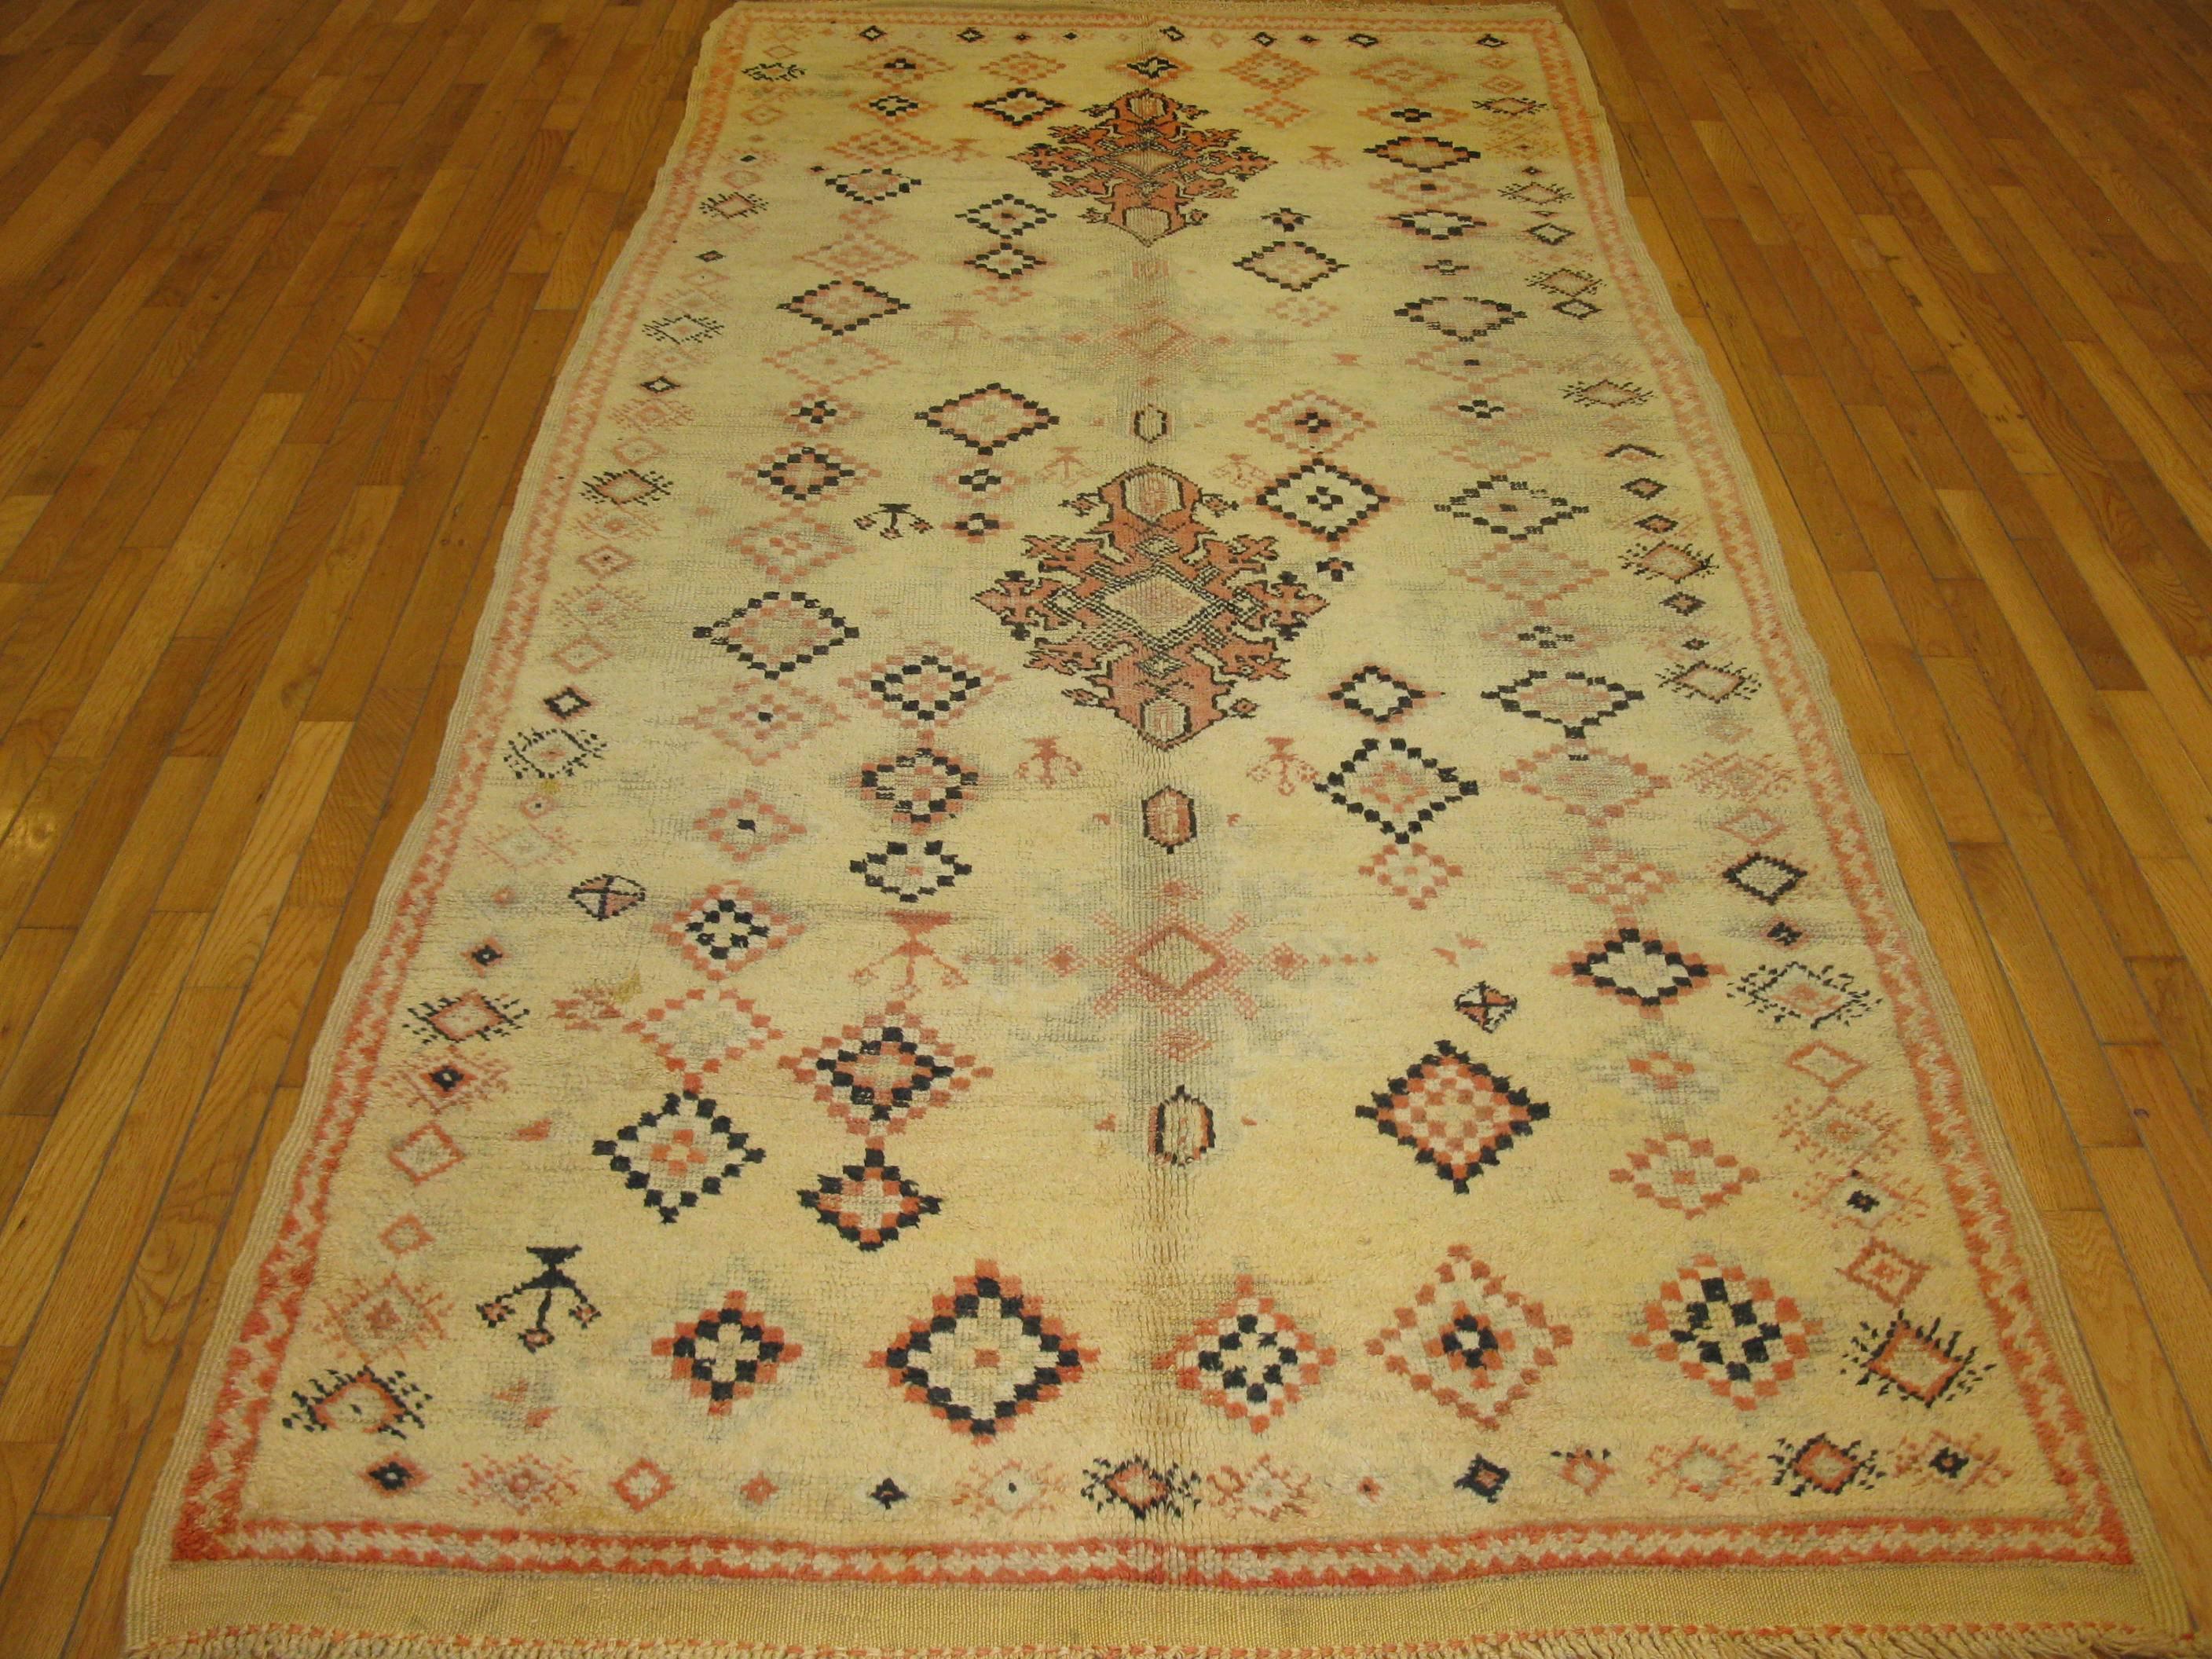 This beautiful hand-knotted vintage Moroccan rug has a simple tribal design with primary colors would enhance the look of any space. The rug is made with wool and all natural dyes. It measures 4' 4'' x 9' 6'' .